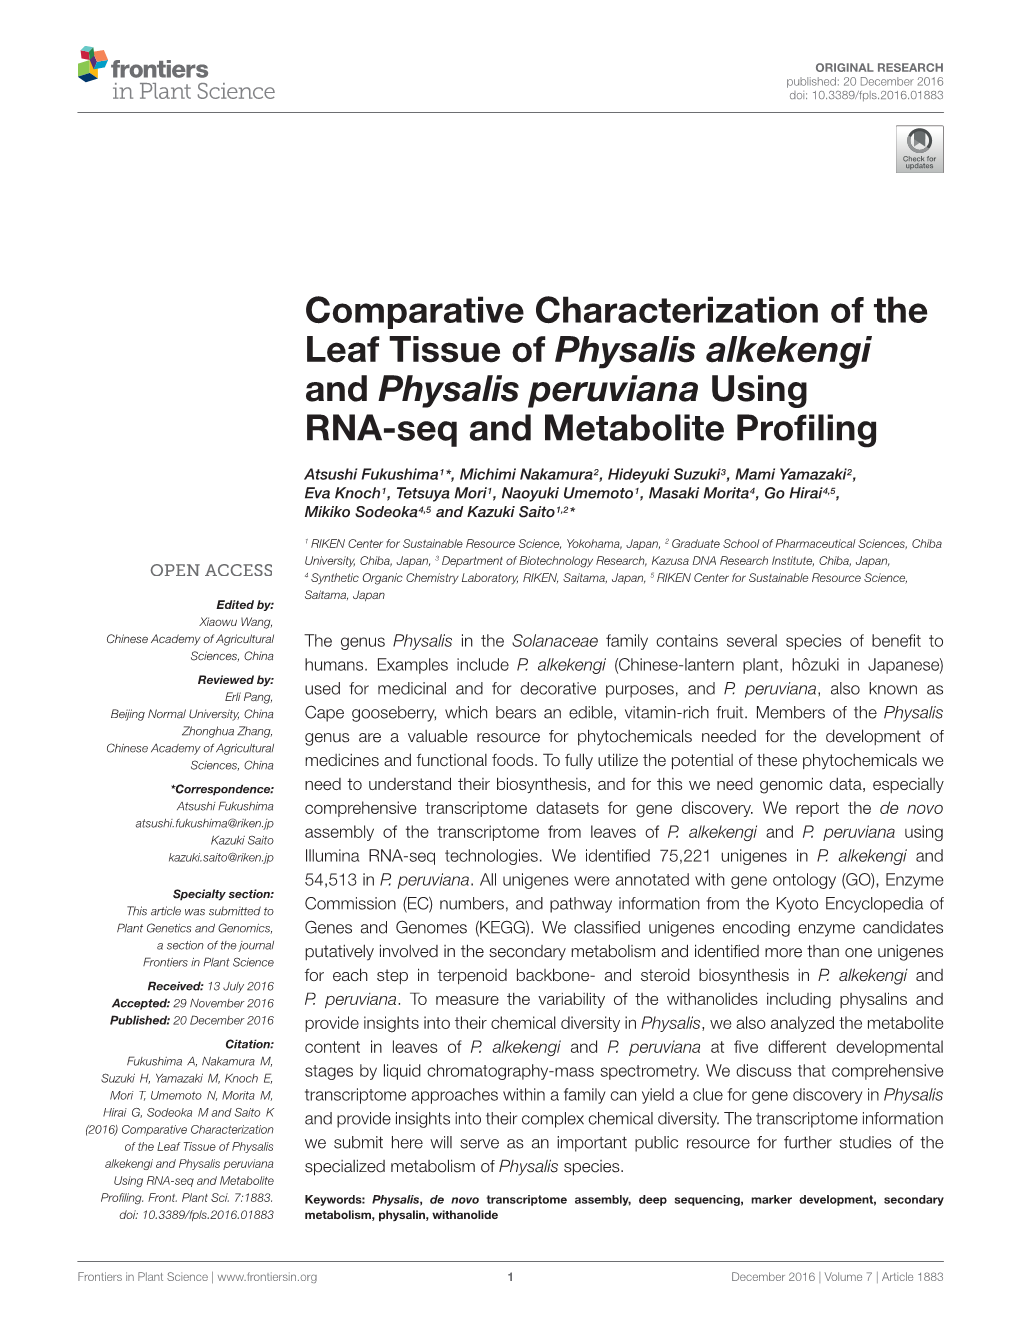 Comparative Characterization of the Leaf Tissue of Physalis Alkekengi and Physalis Peruviana Using RNA-Seq and Metabolite Proﬁling